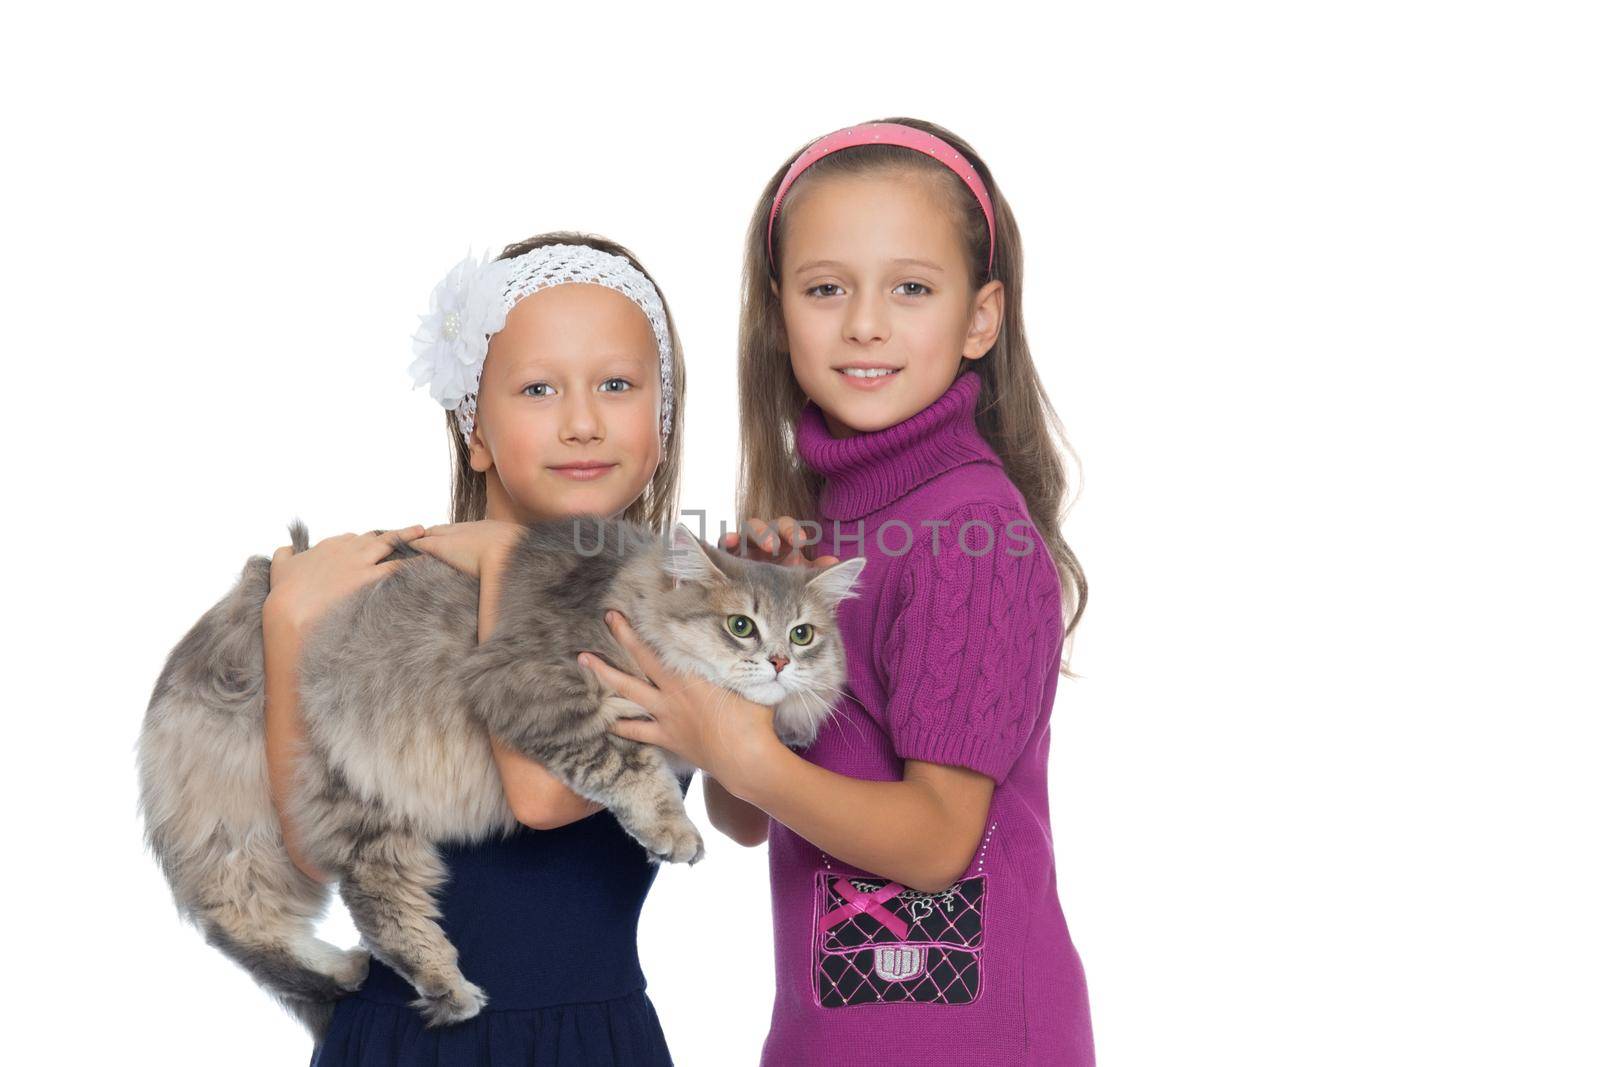 Girls play with a cat. Isolated on white background by kolesnikov_studio